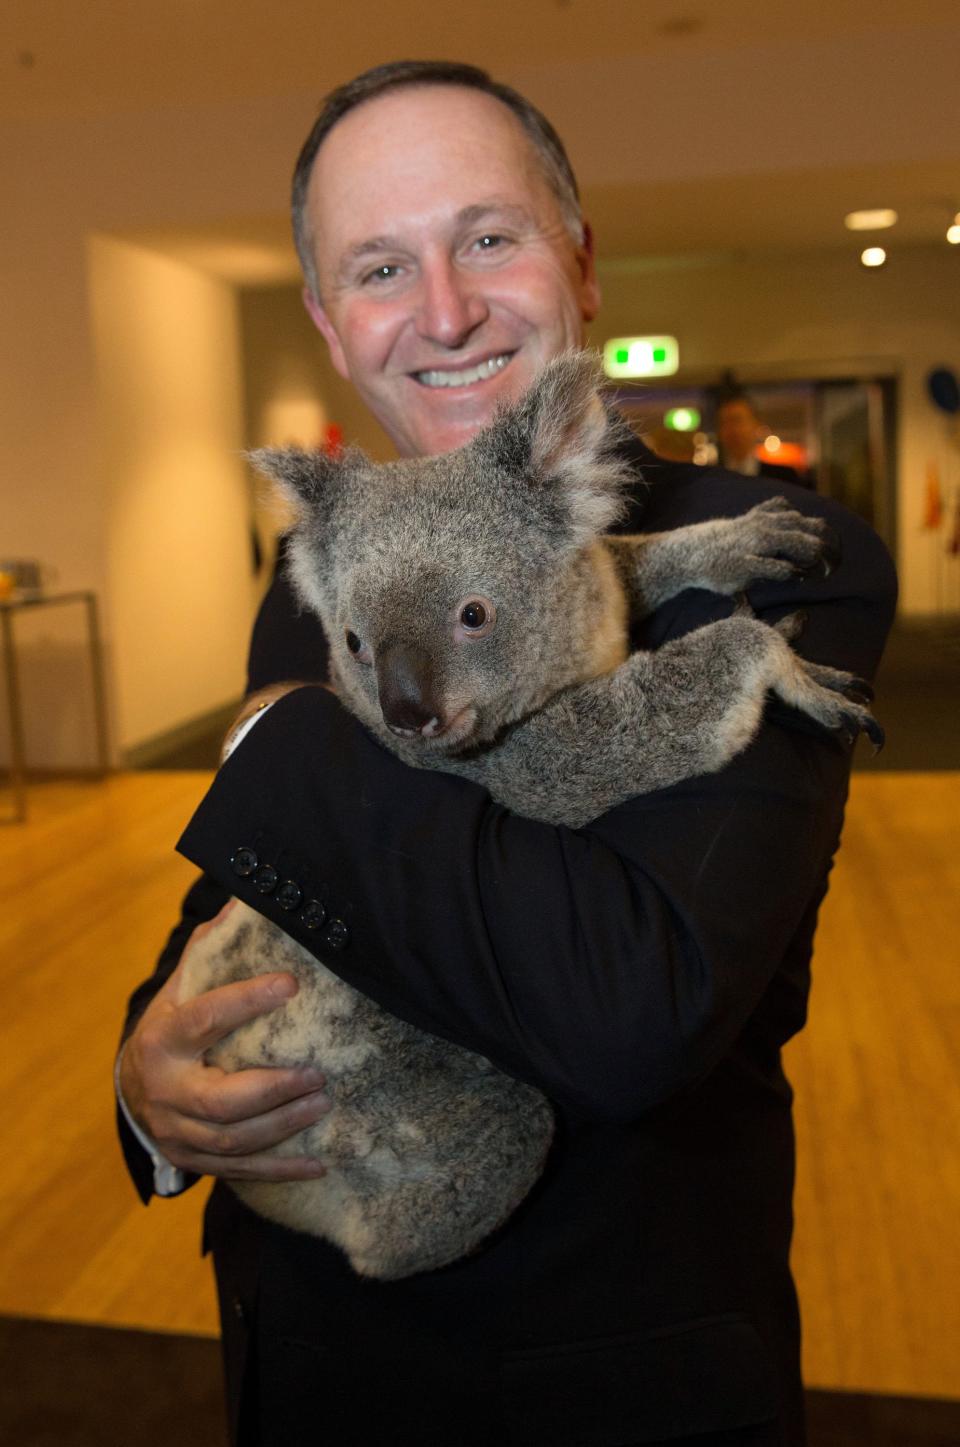 G20 handout photo shows New Zealand's PM Key holding a koala before the G20 Leaders' Summit in Brisbane